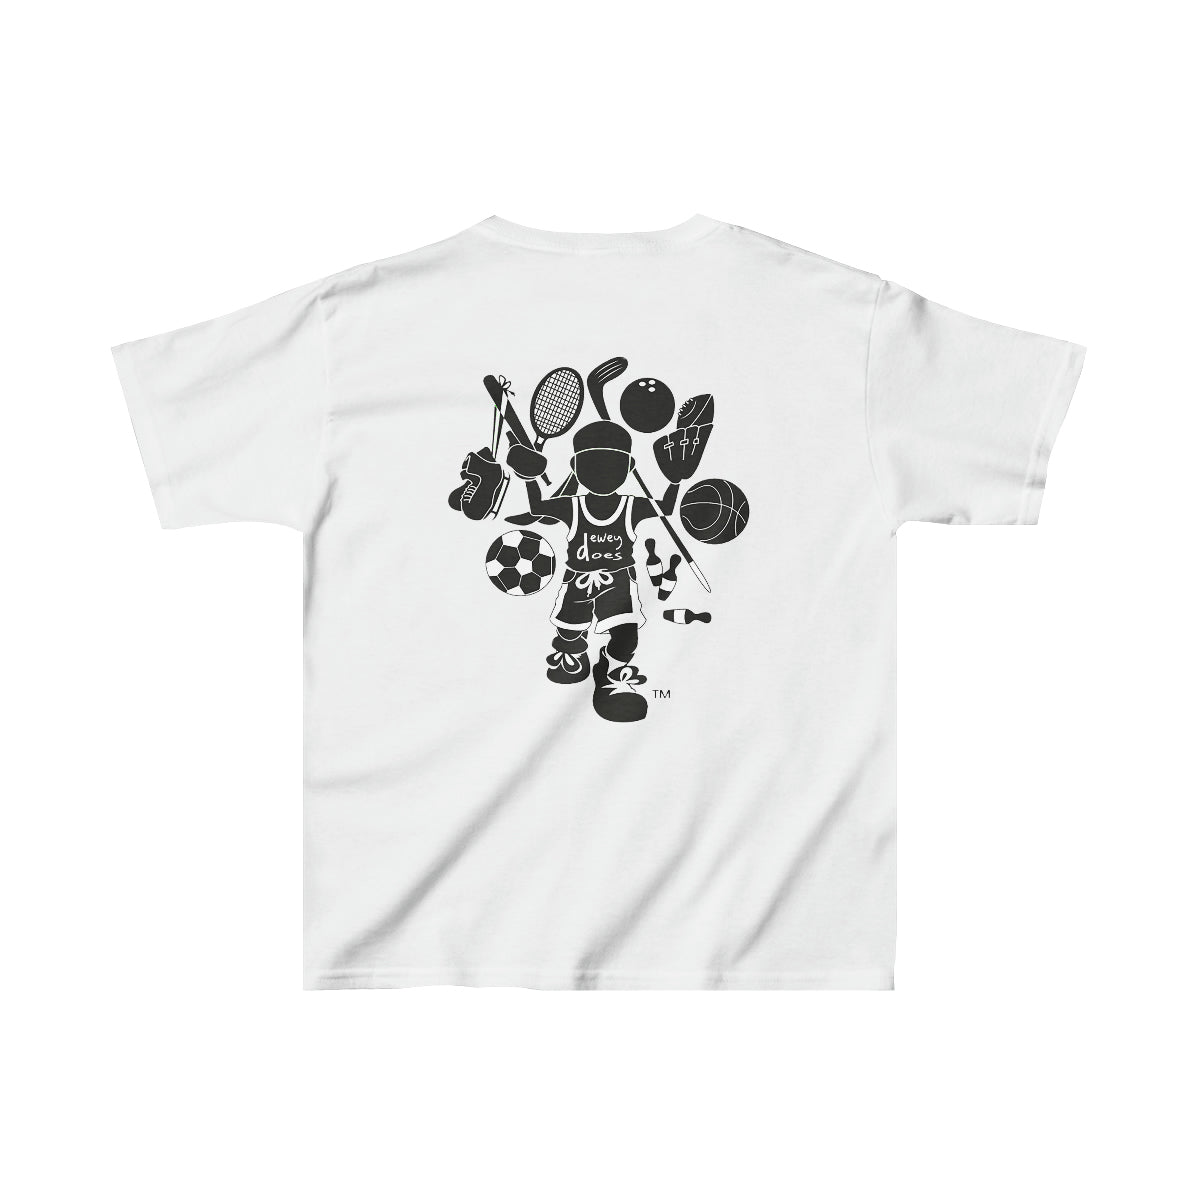 life is sporting - kids heavy cotton™ tee